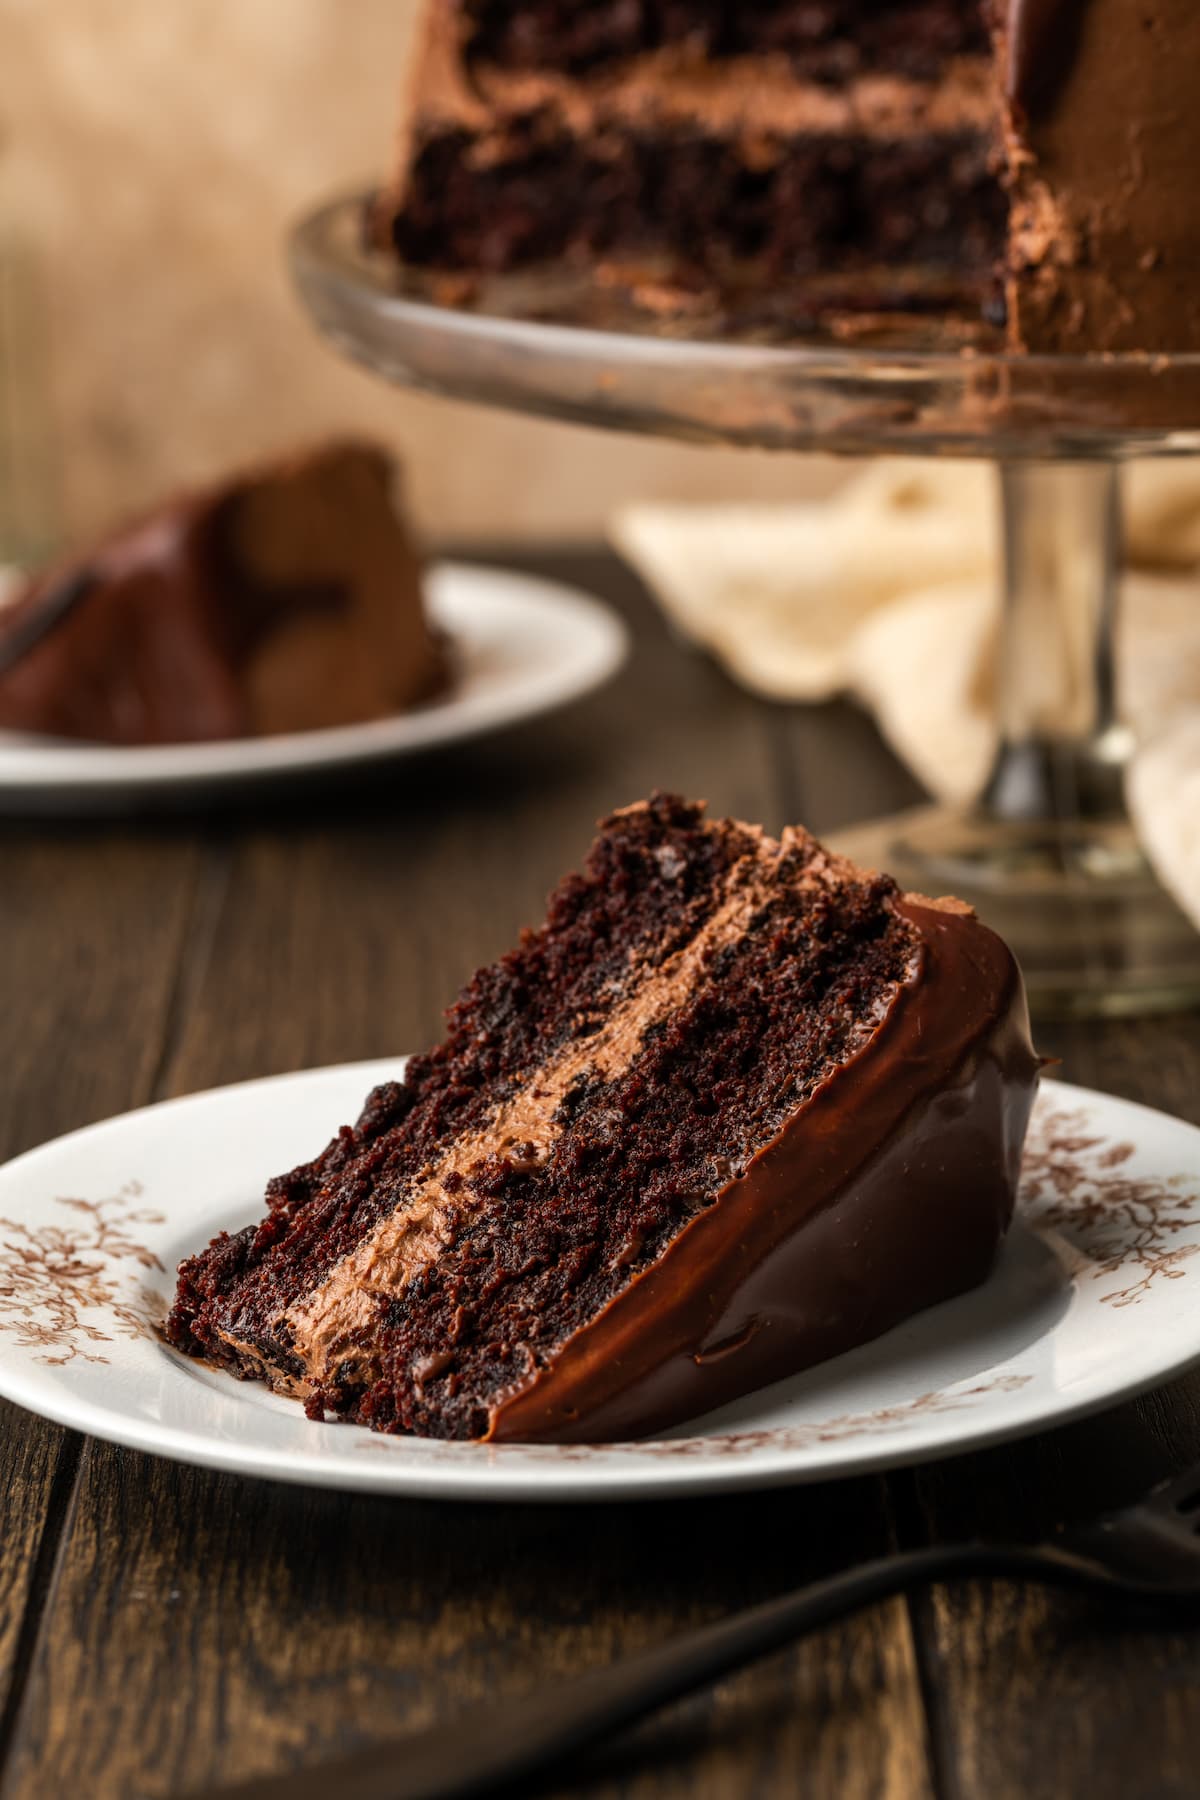 A slice of perfect chocolate layer cake on a white plate next to a fork, with the full cake on a cake stand in the background.